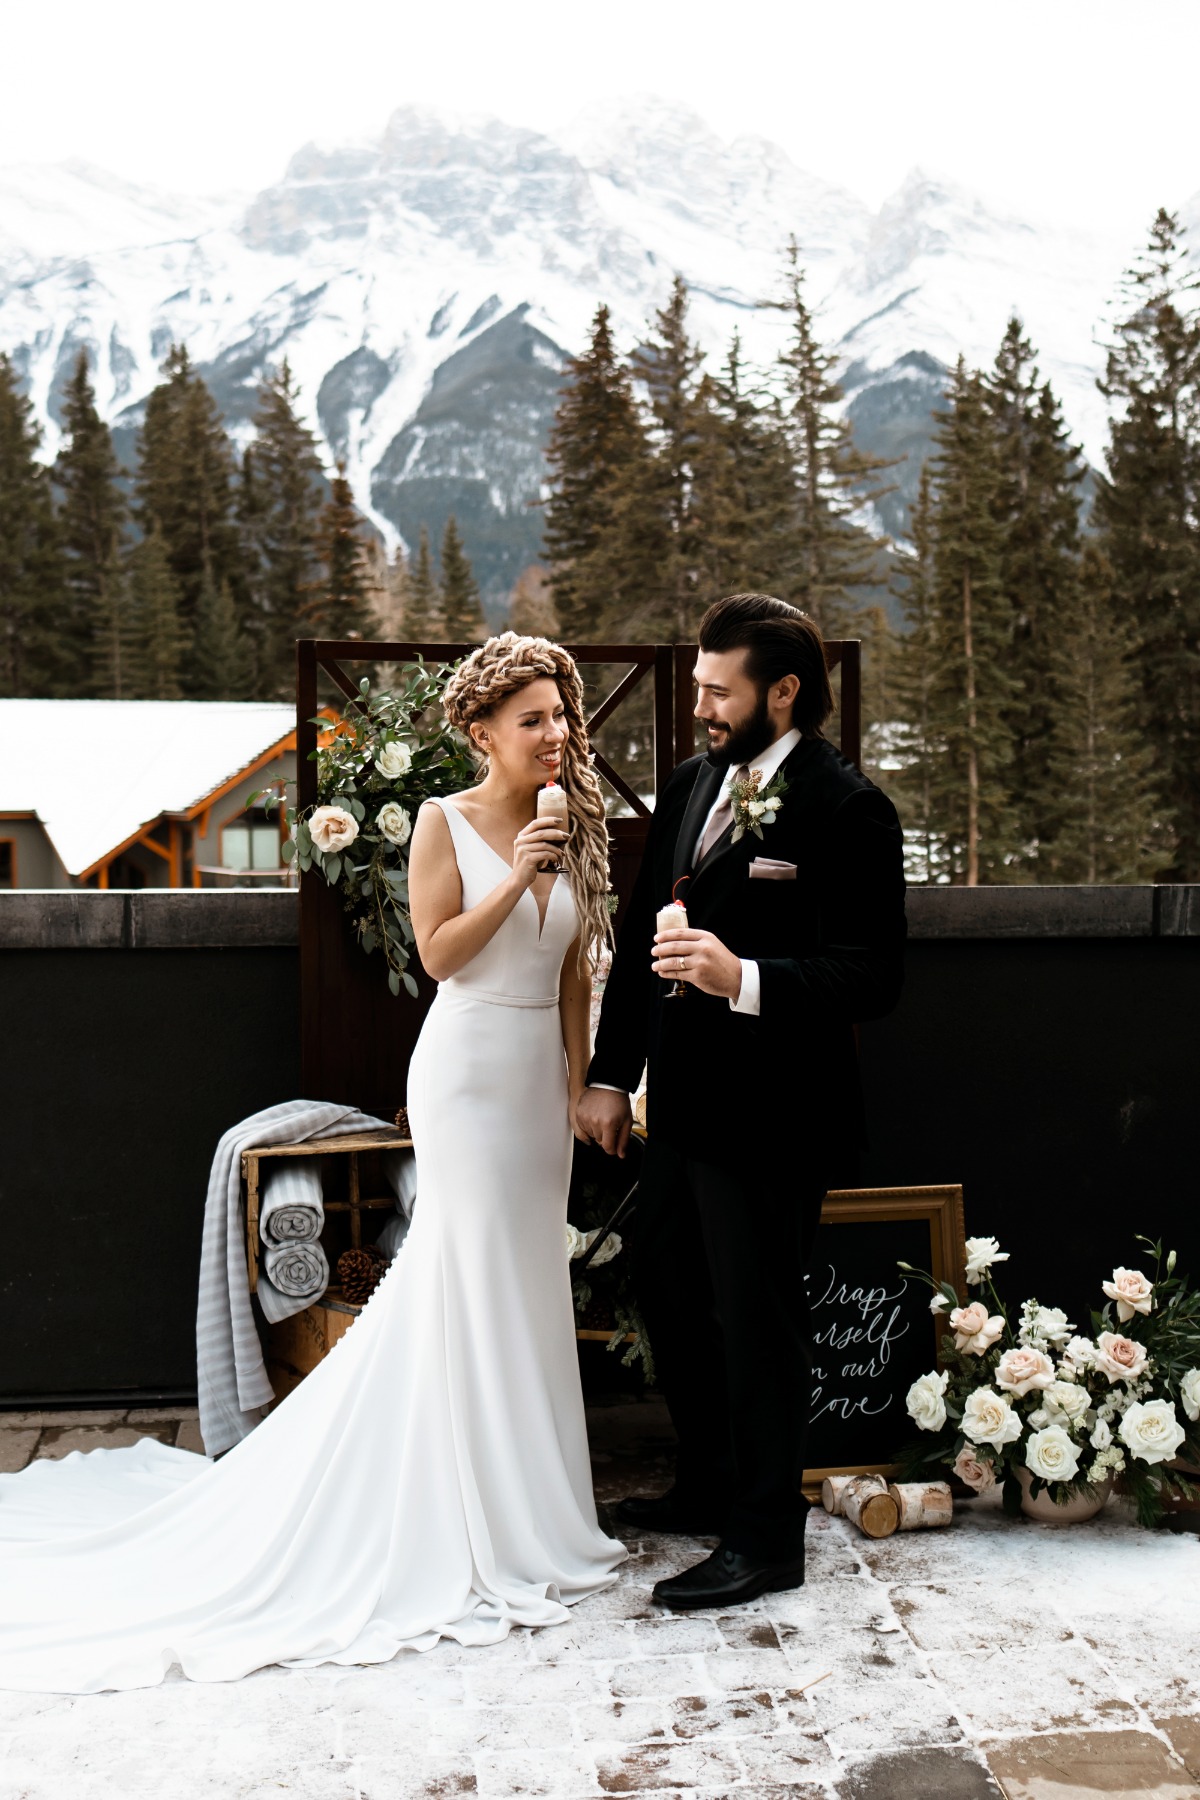 A Cozy Canmore Winter Elopement in the Mountains